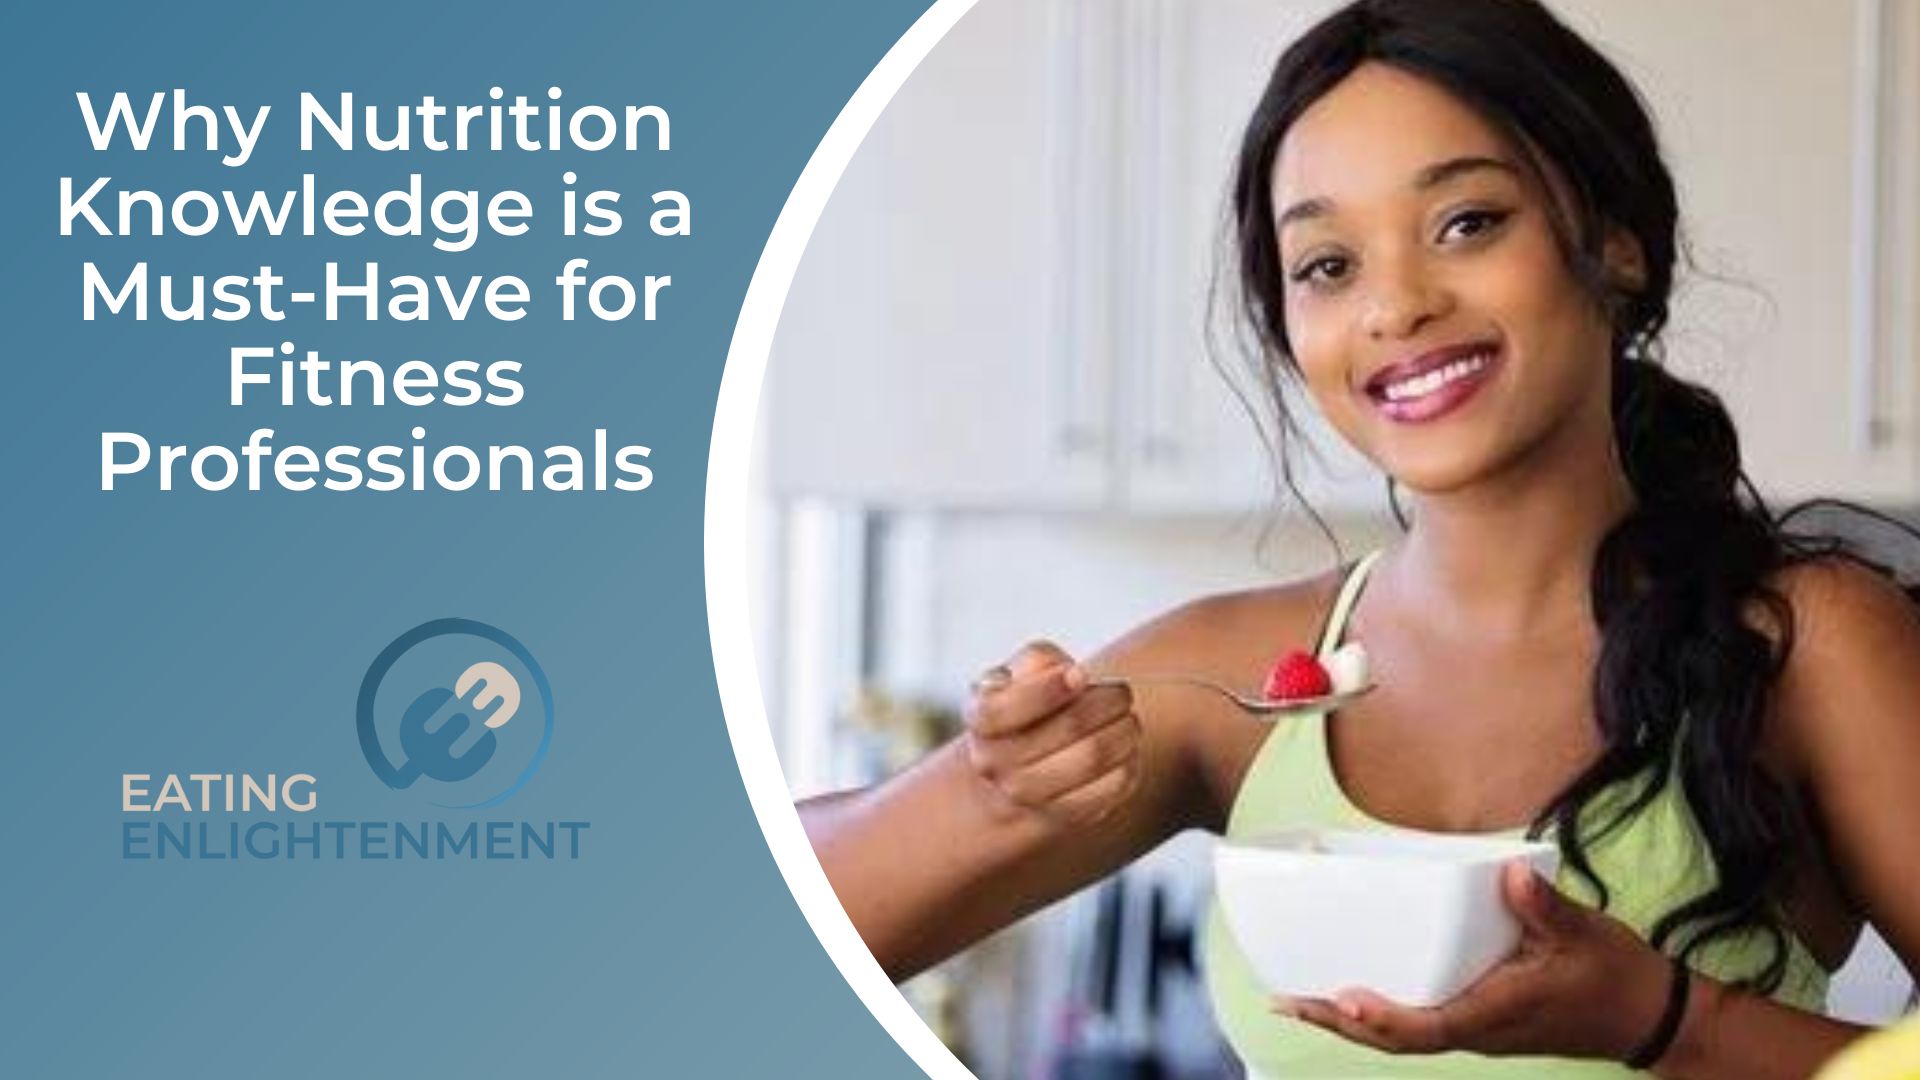 Why Nutrition Knowledge is a Must-Have for Fitness Professionals